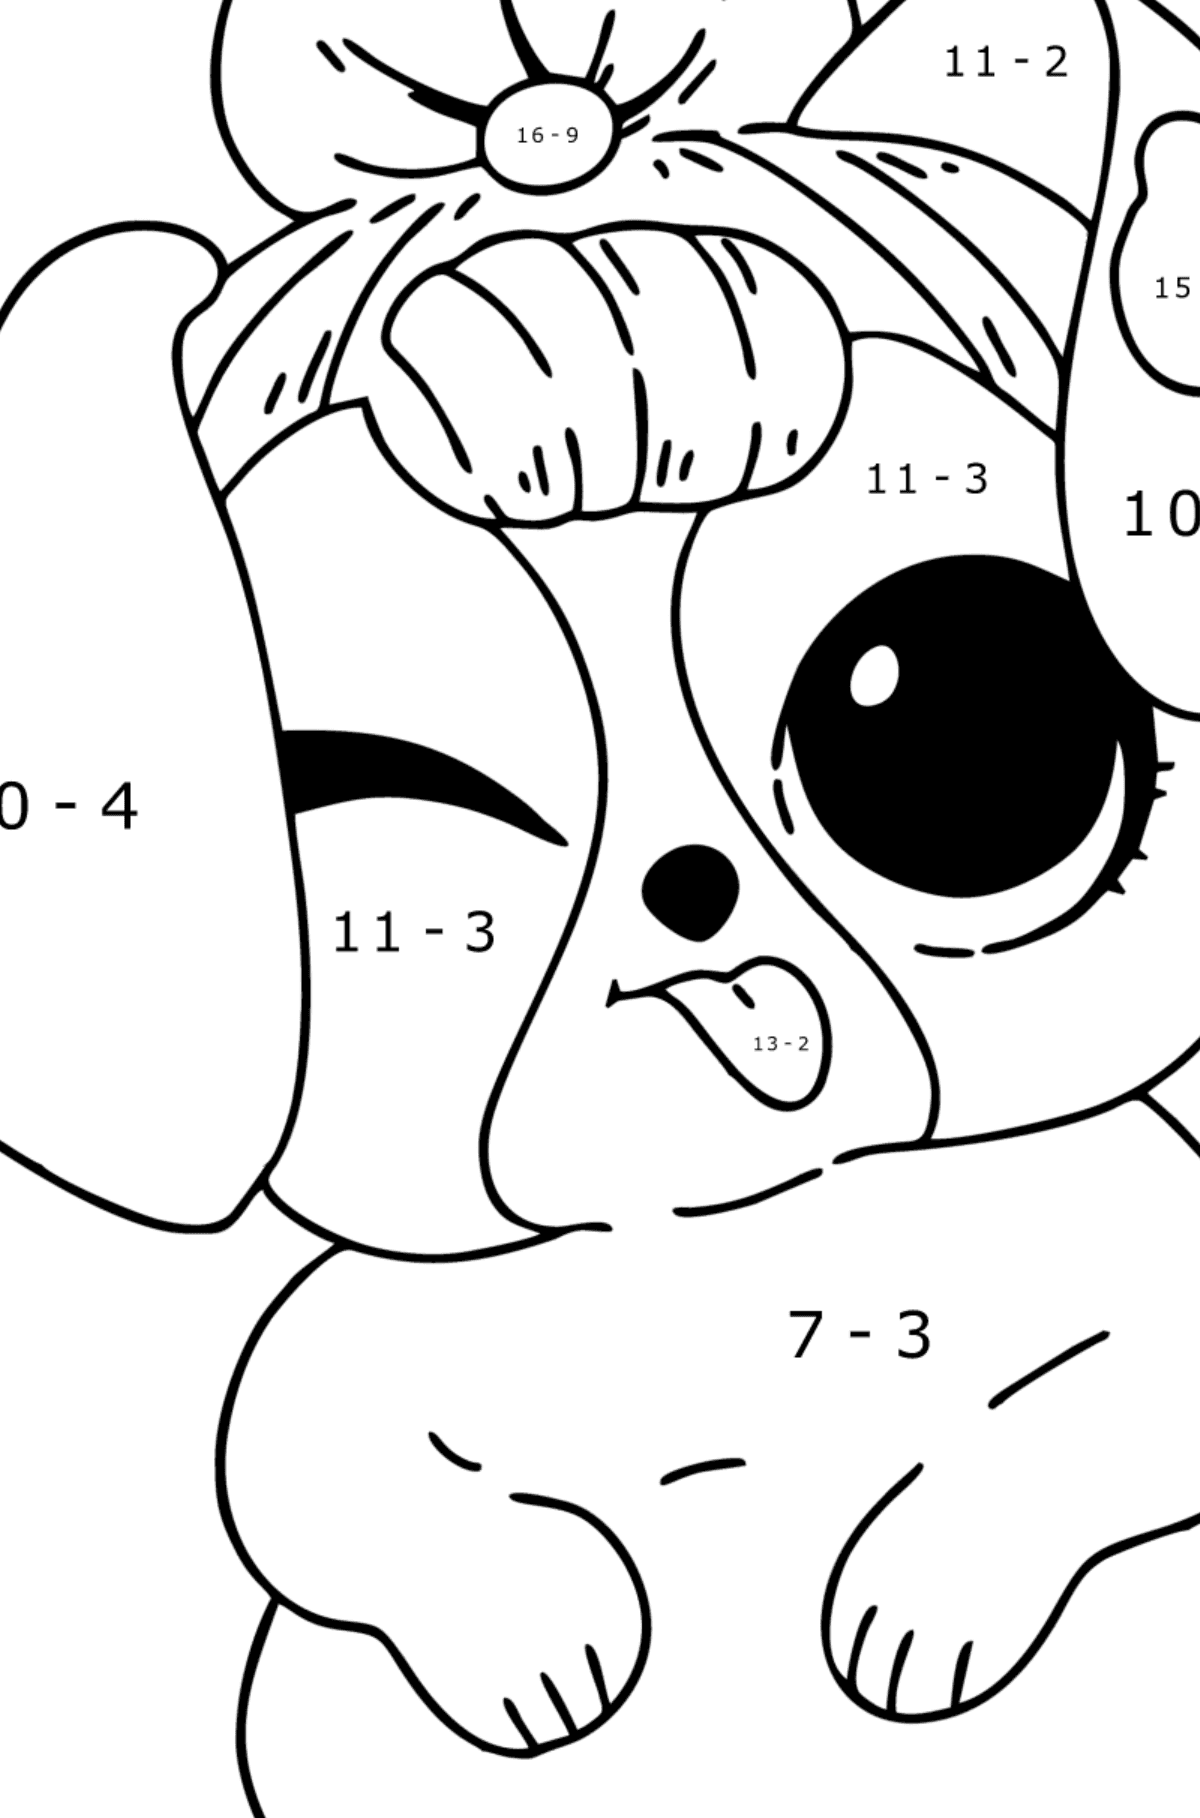 Coloring page LOL pet cute puppy - Math Coloring - Subtraction for Kids